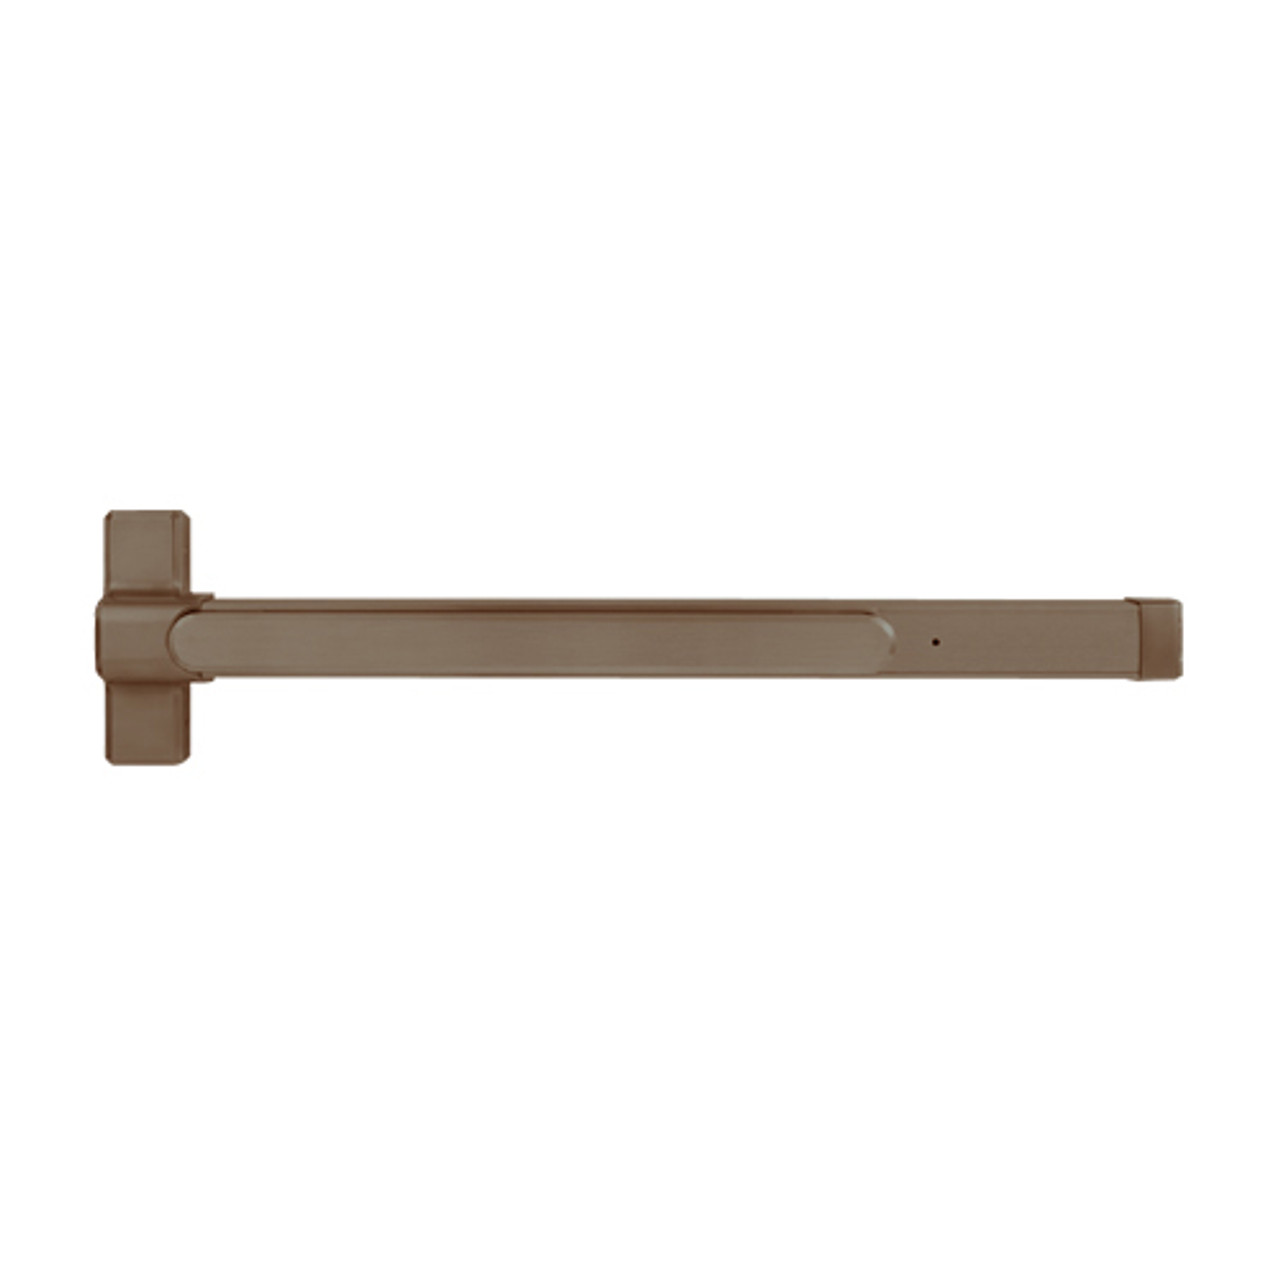 QED129LR-36-8-313AN Stanley QED100 Series Heavy Duty Concealed Vertical Rod Fire Rated Exit Device in Anodized Duranodic Bronze Finish